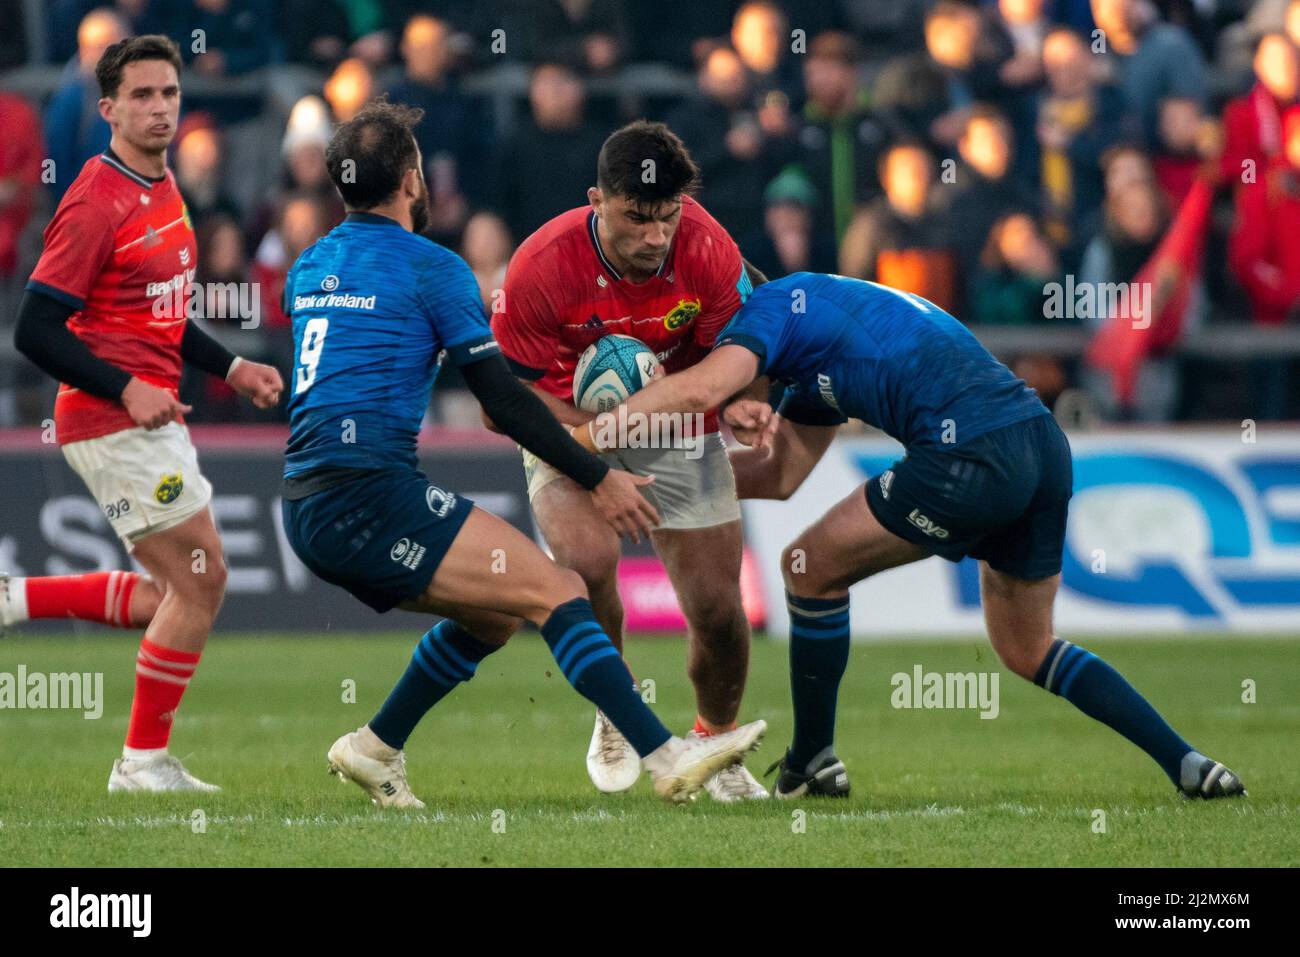 Damian De Allende of Munster tackled by Jamison Gibson-Park of Leinster during the United Rugby Championship Round 15 match between Munster Rugby and Leinster Rugby at Thomond Park in Limerick, Ireland on